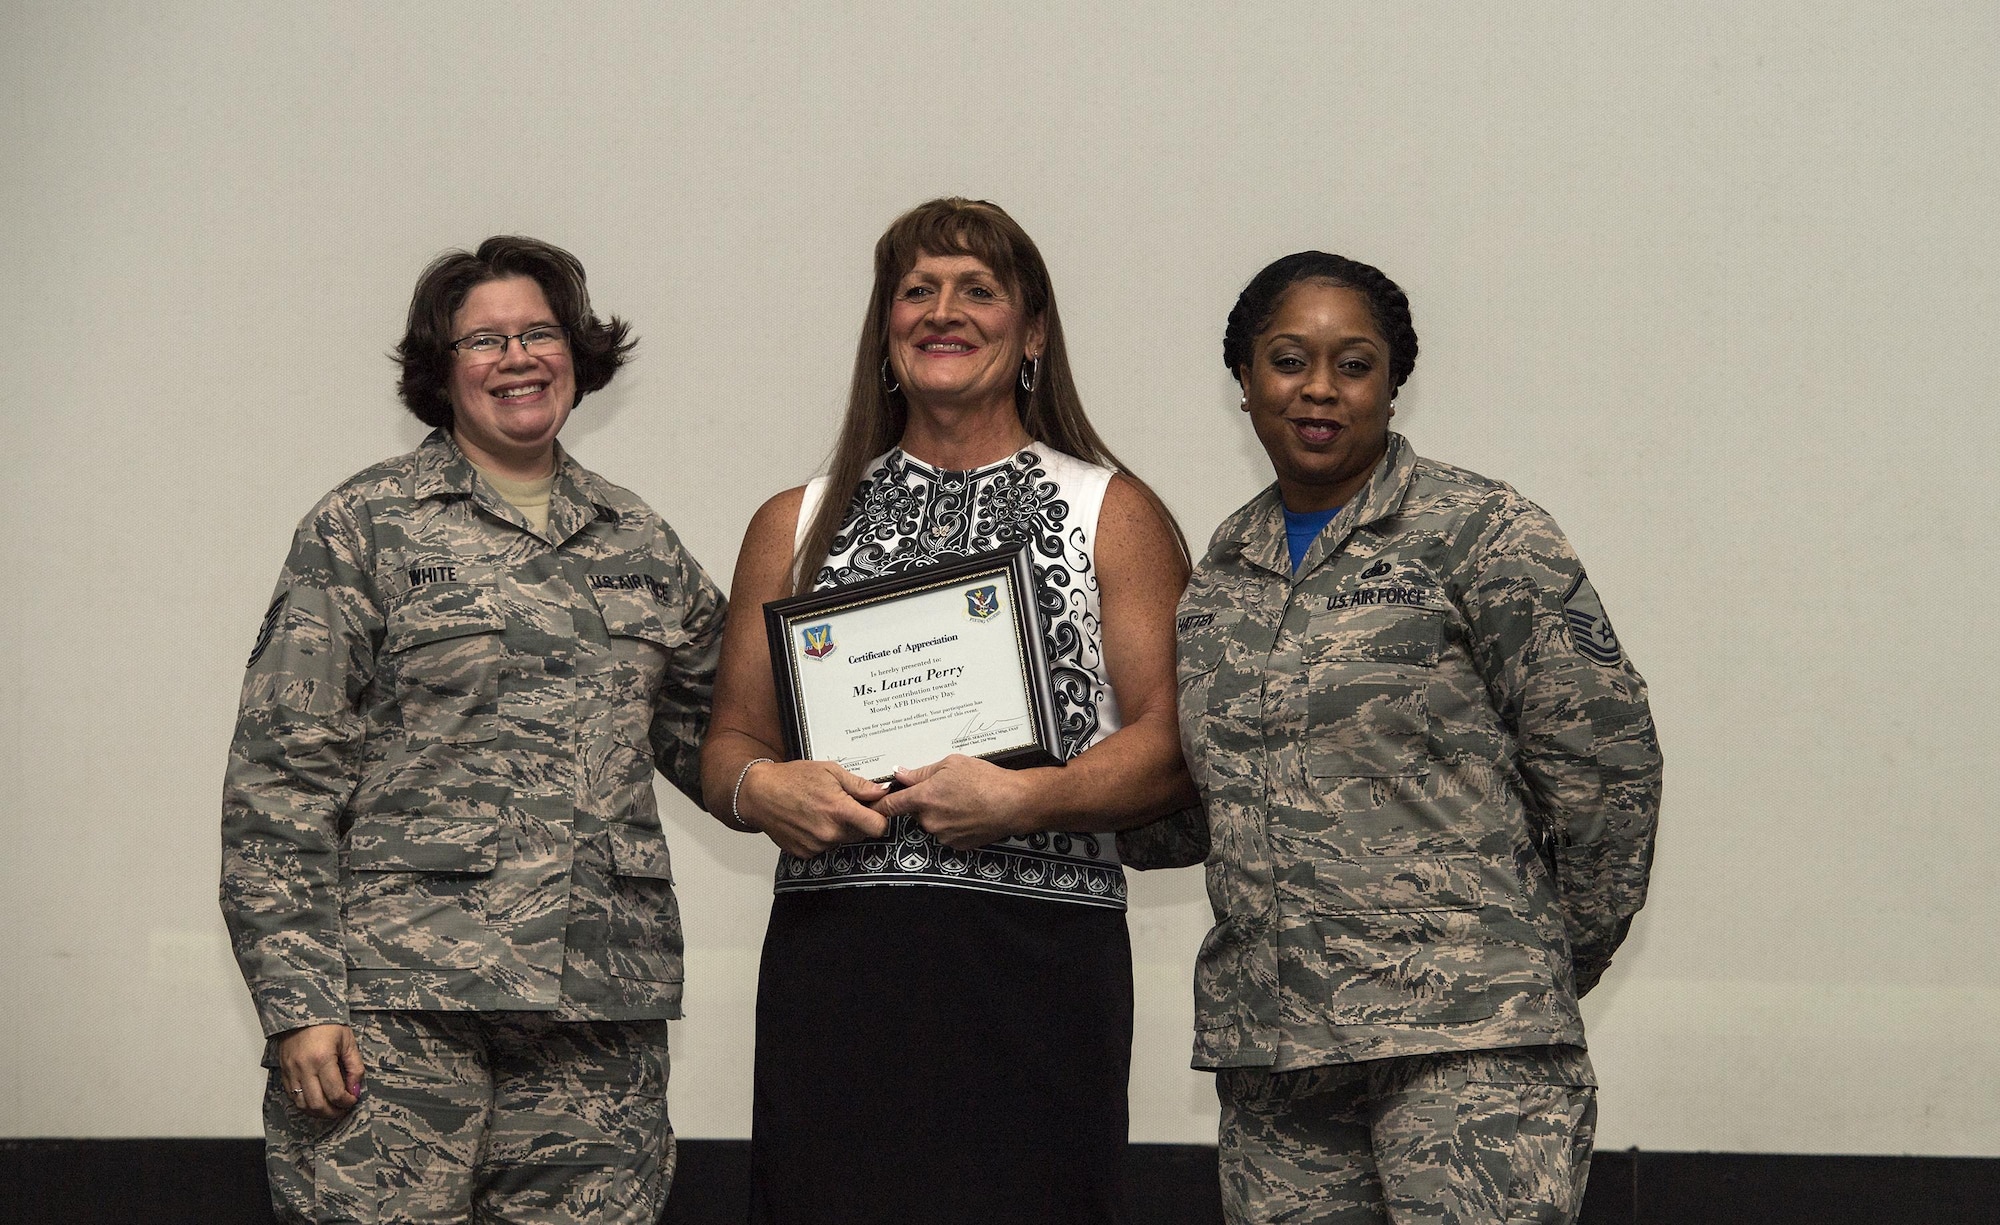 Retired U.S. Air Force Maj. Laura Perry, center, 45th Medical Operations Squadron master social worker, poses for a photo after a speaking engagement, Dec. 2, 2016, at Moody Air Force Base, Ga. Perry spoke about her journey as a transgender veteran and what the opportunity to openly serve has given military members in this community as part of Moody’s Diversity Day celebrating LGBT Pride month. (U.S. Air Force photo by Airman 1st Class Janiqua P. Robinson)